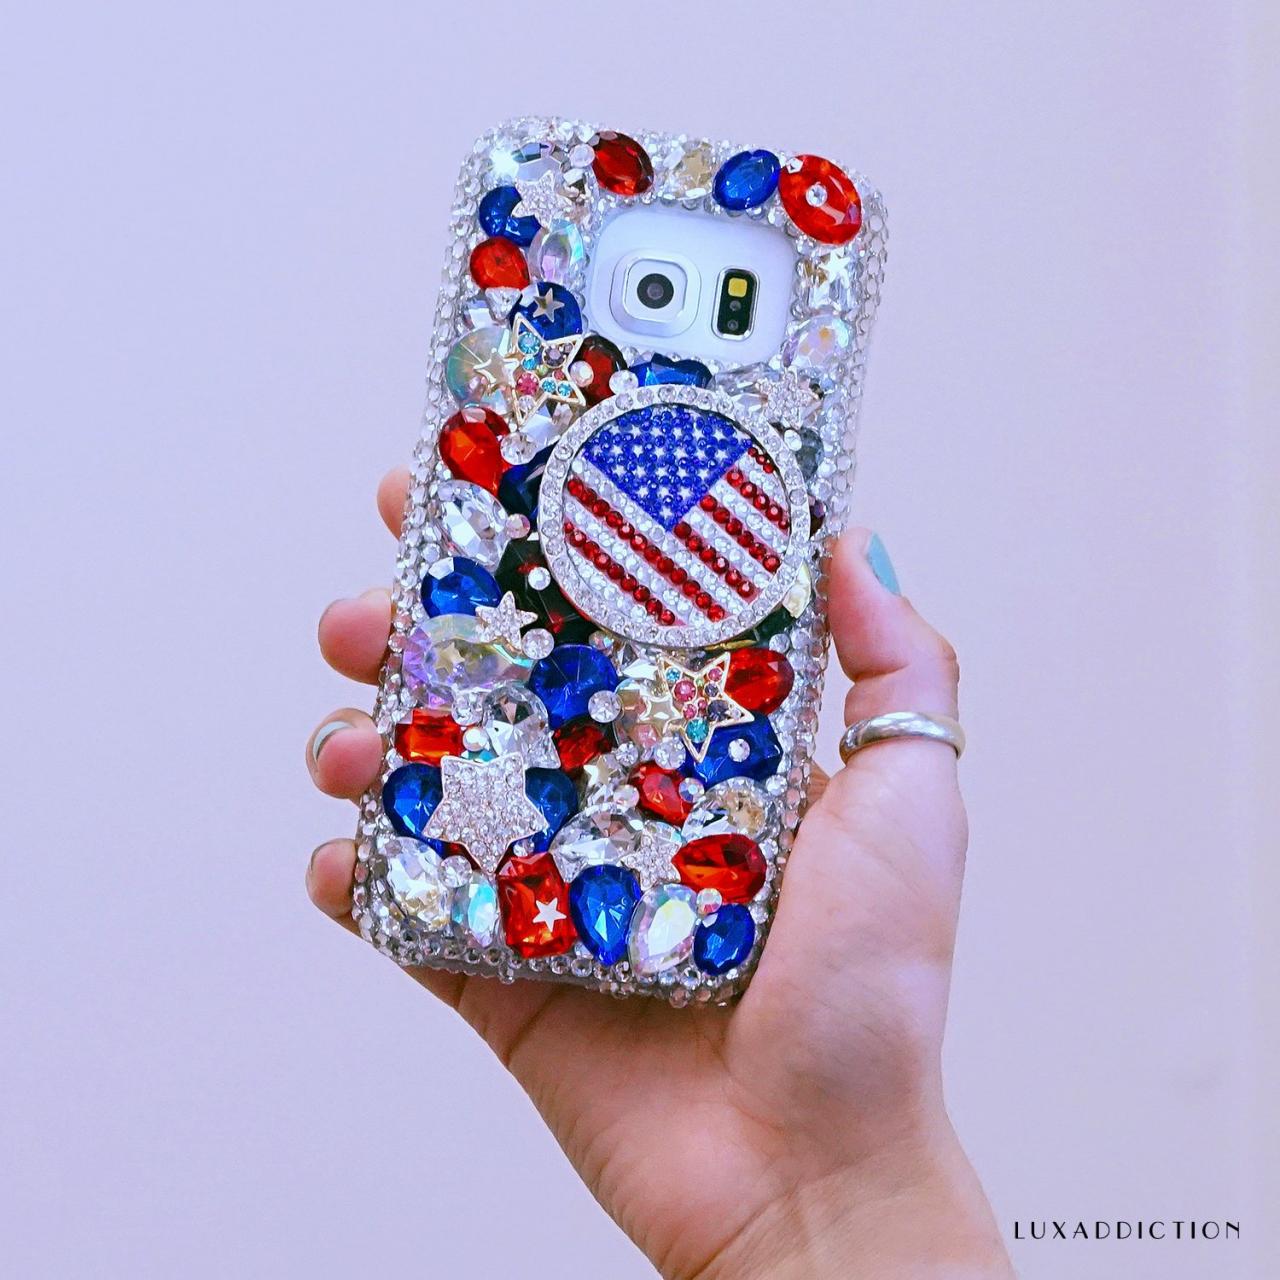 Genuine Crystals Case For iPhone X XS Max XR 7 8 Plus Samsung Galaxy S9 Note 9 Bling Diamond Sparkle American Flag Red Blue Stones